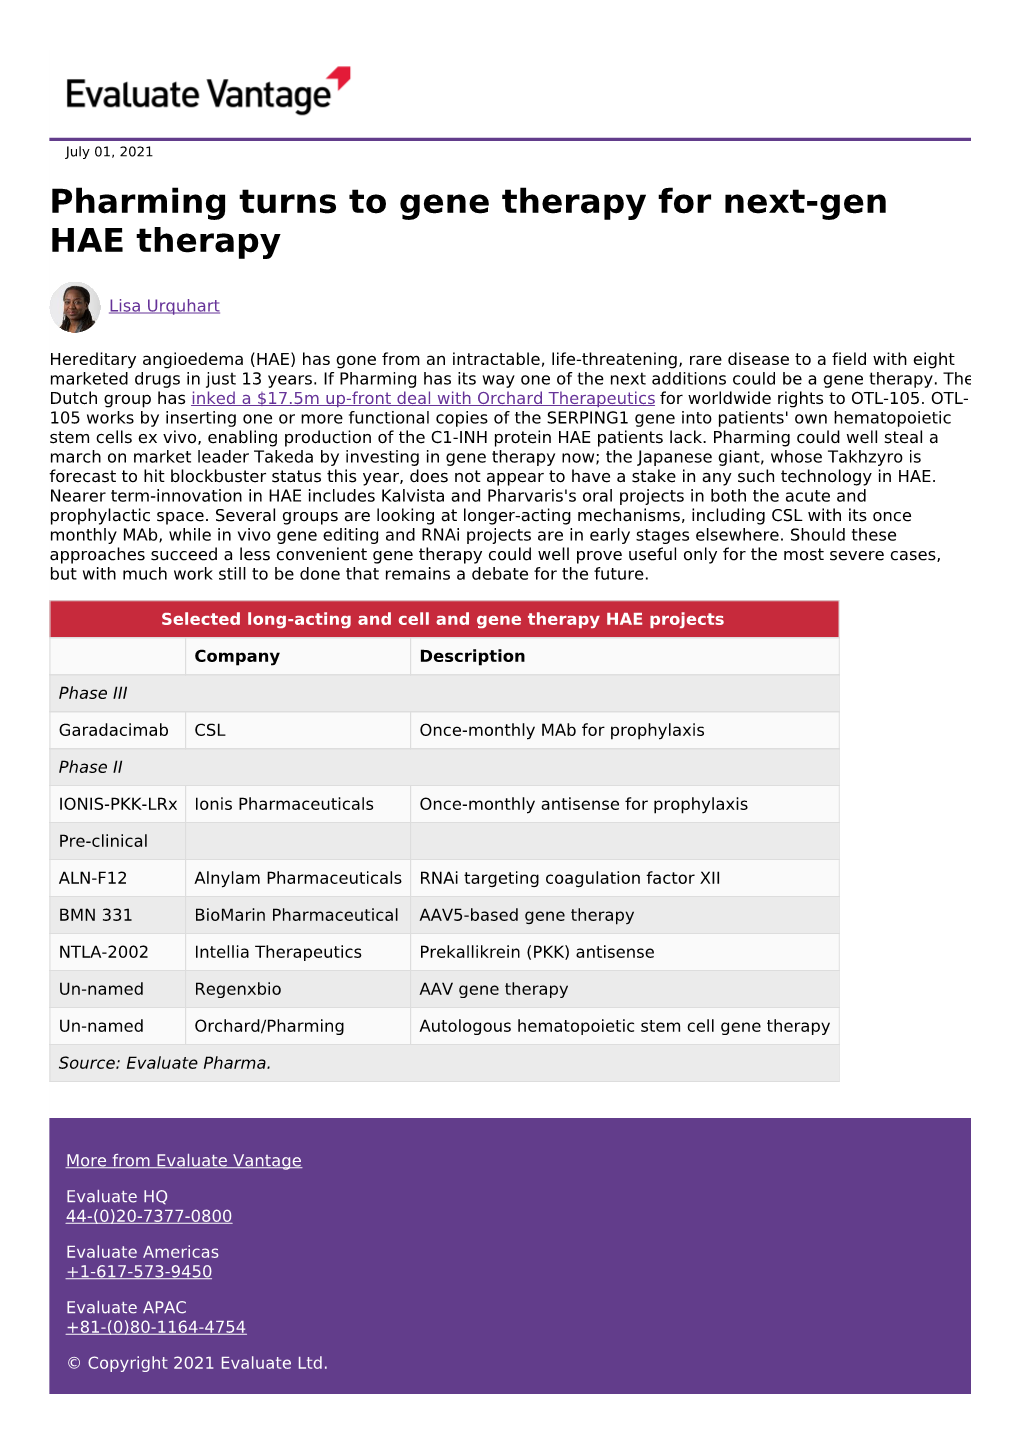 Pharming Turns to Gene Therapy for Next-Gen HAE Therapy